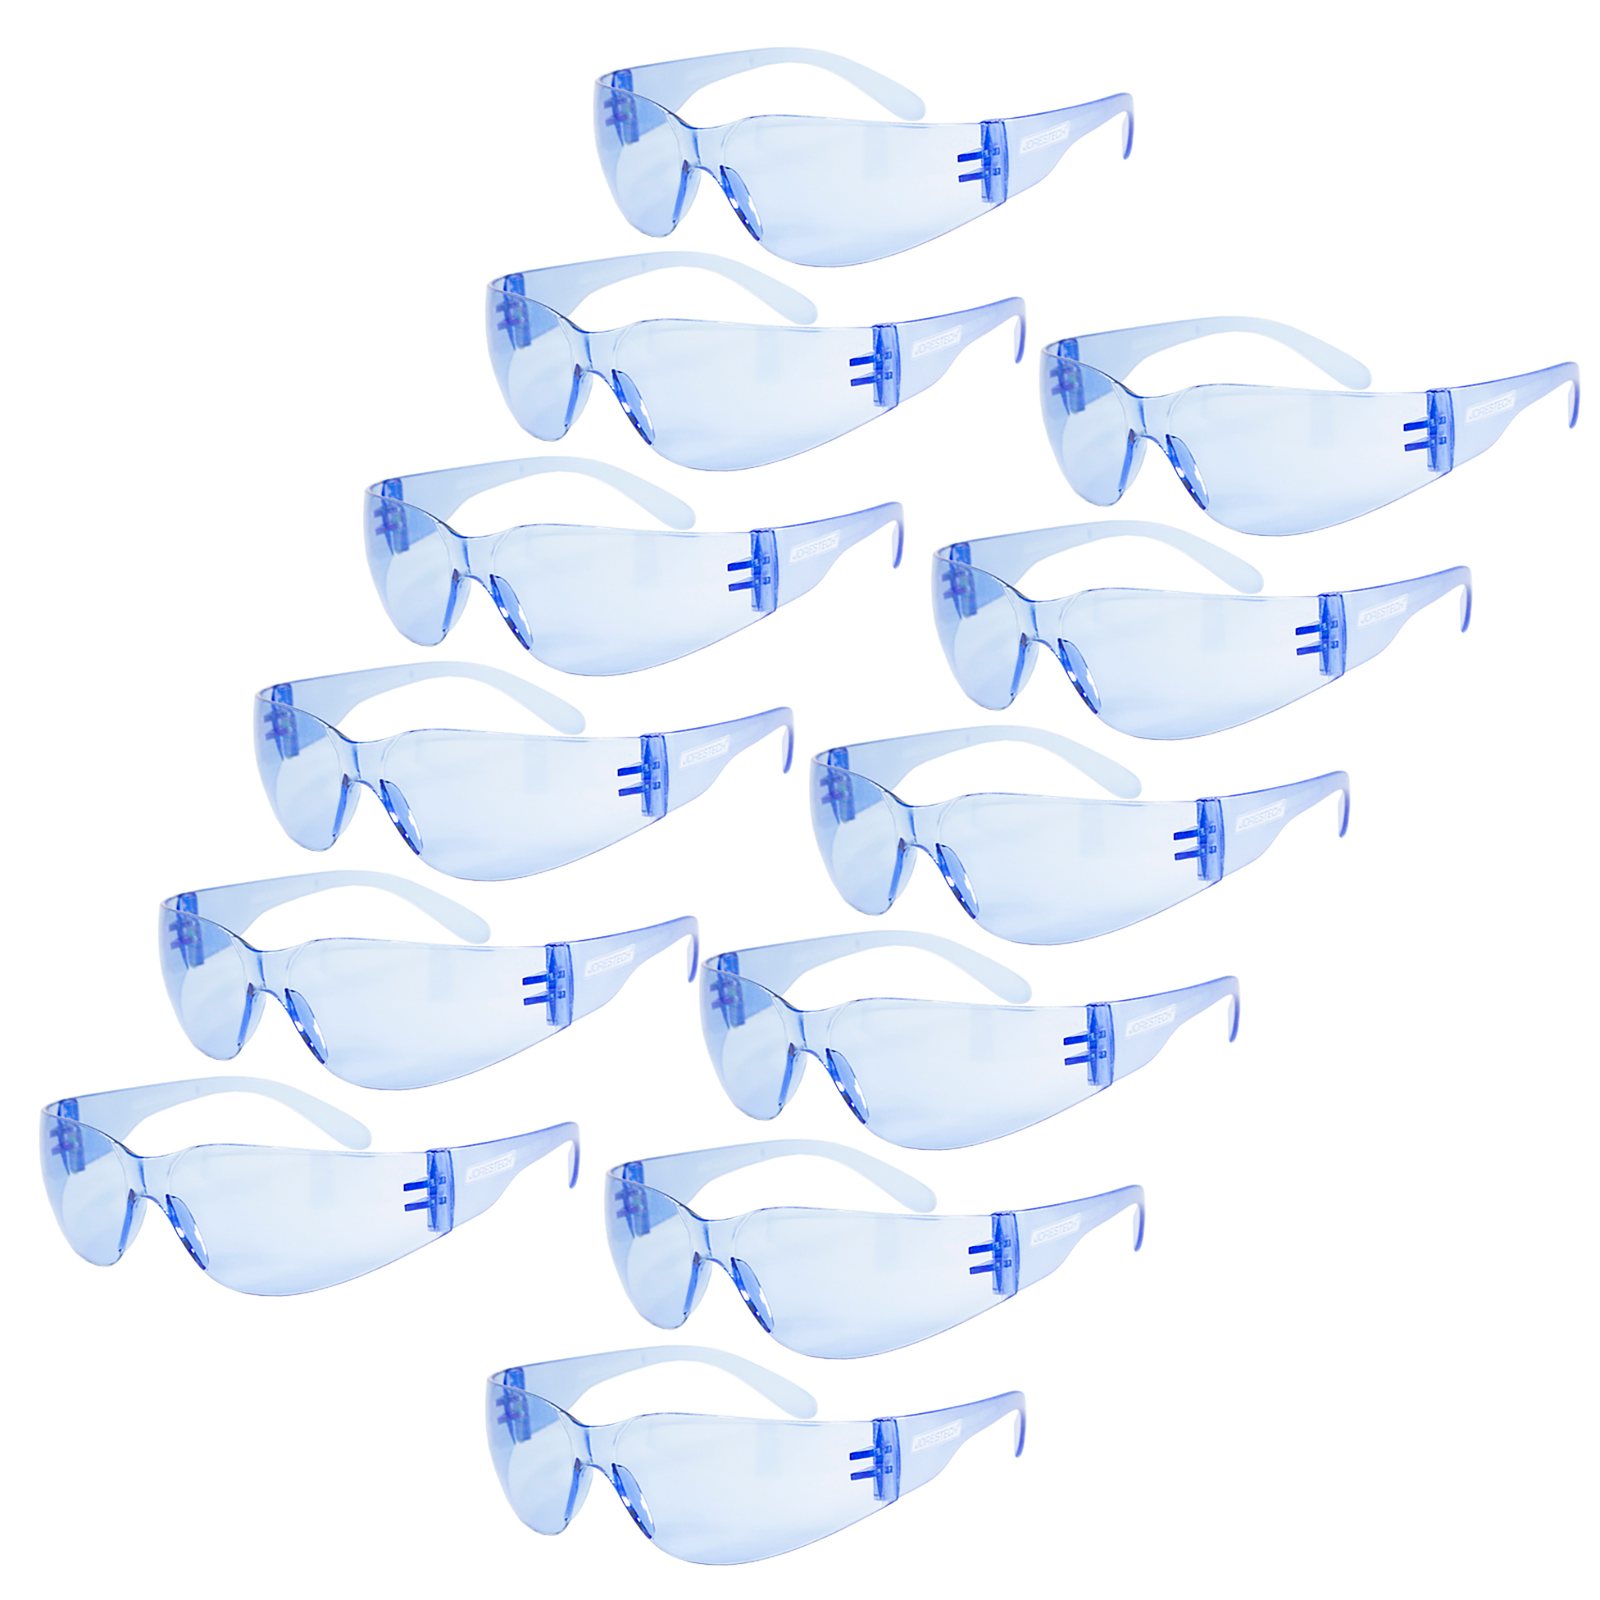 Set of 12 blue lenses and blue temples JORESTECH Safety High Impact ANSI compliant safety glasses 